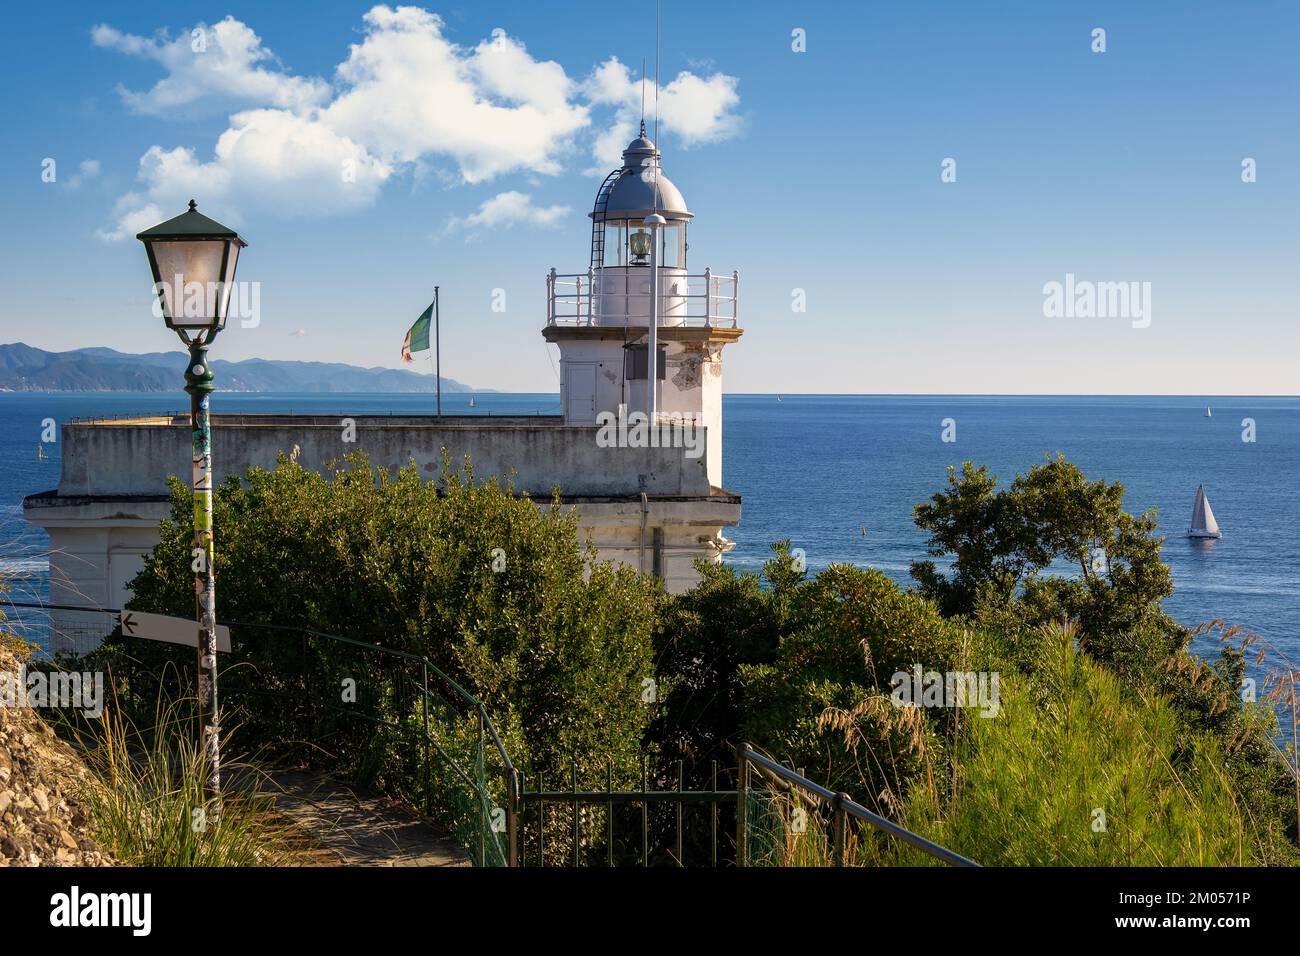 Portofino Lighthouse overlooking the water with white clouds, Liguria, Italy Stock Photo